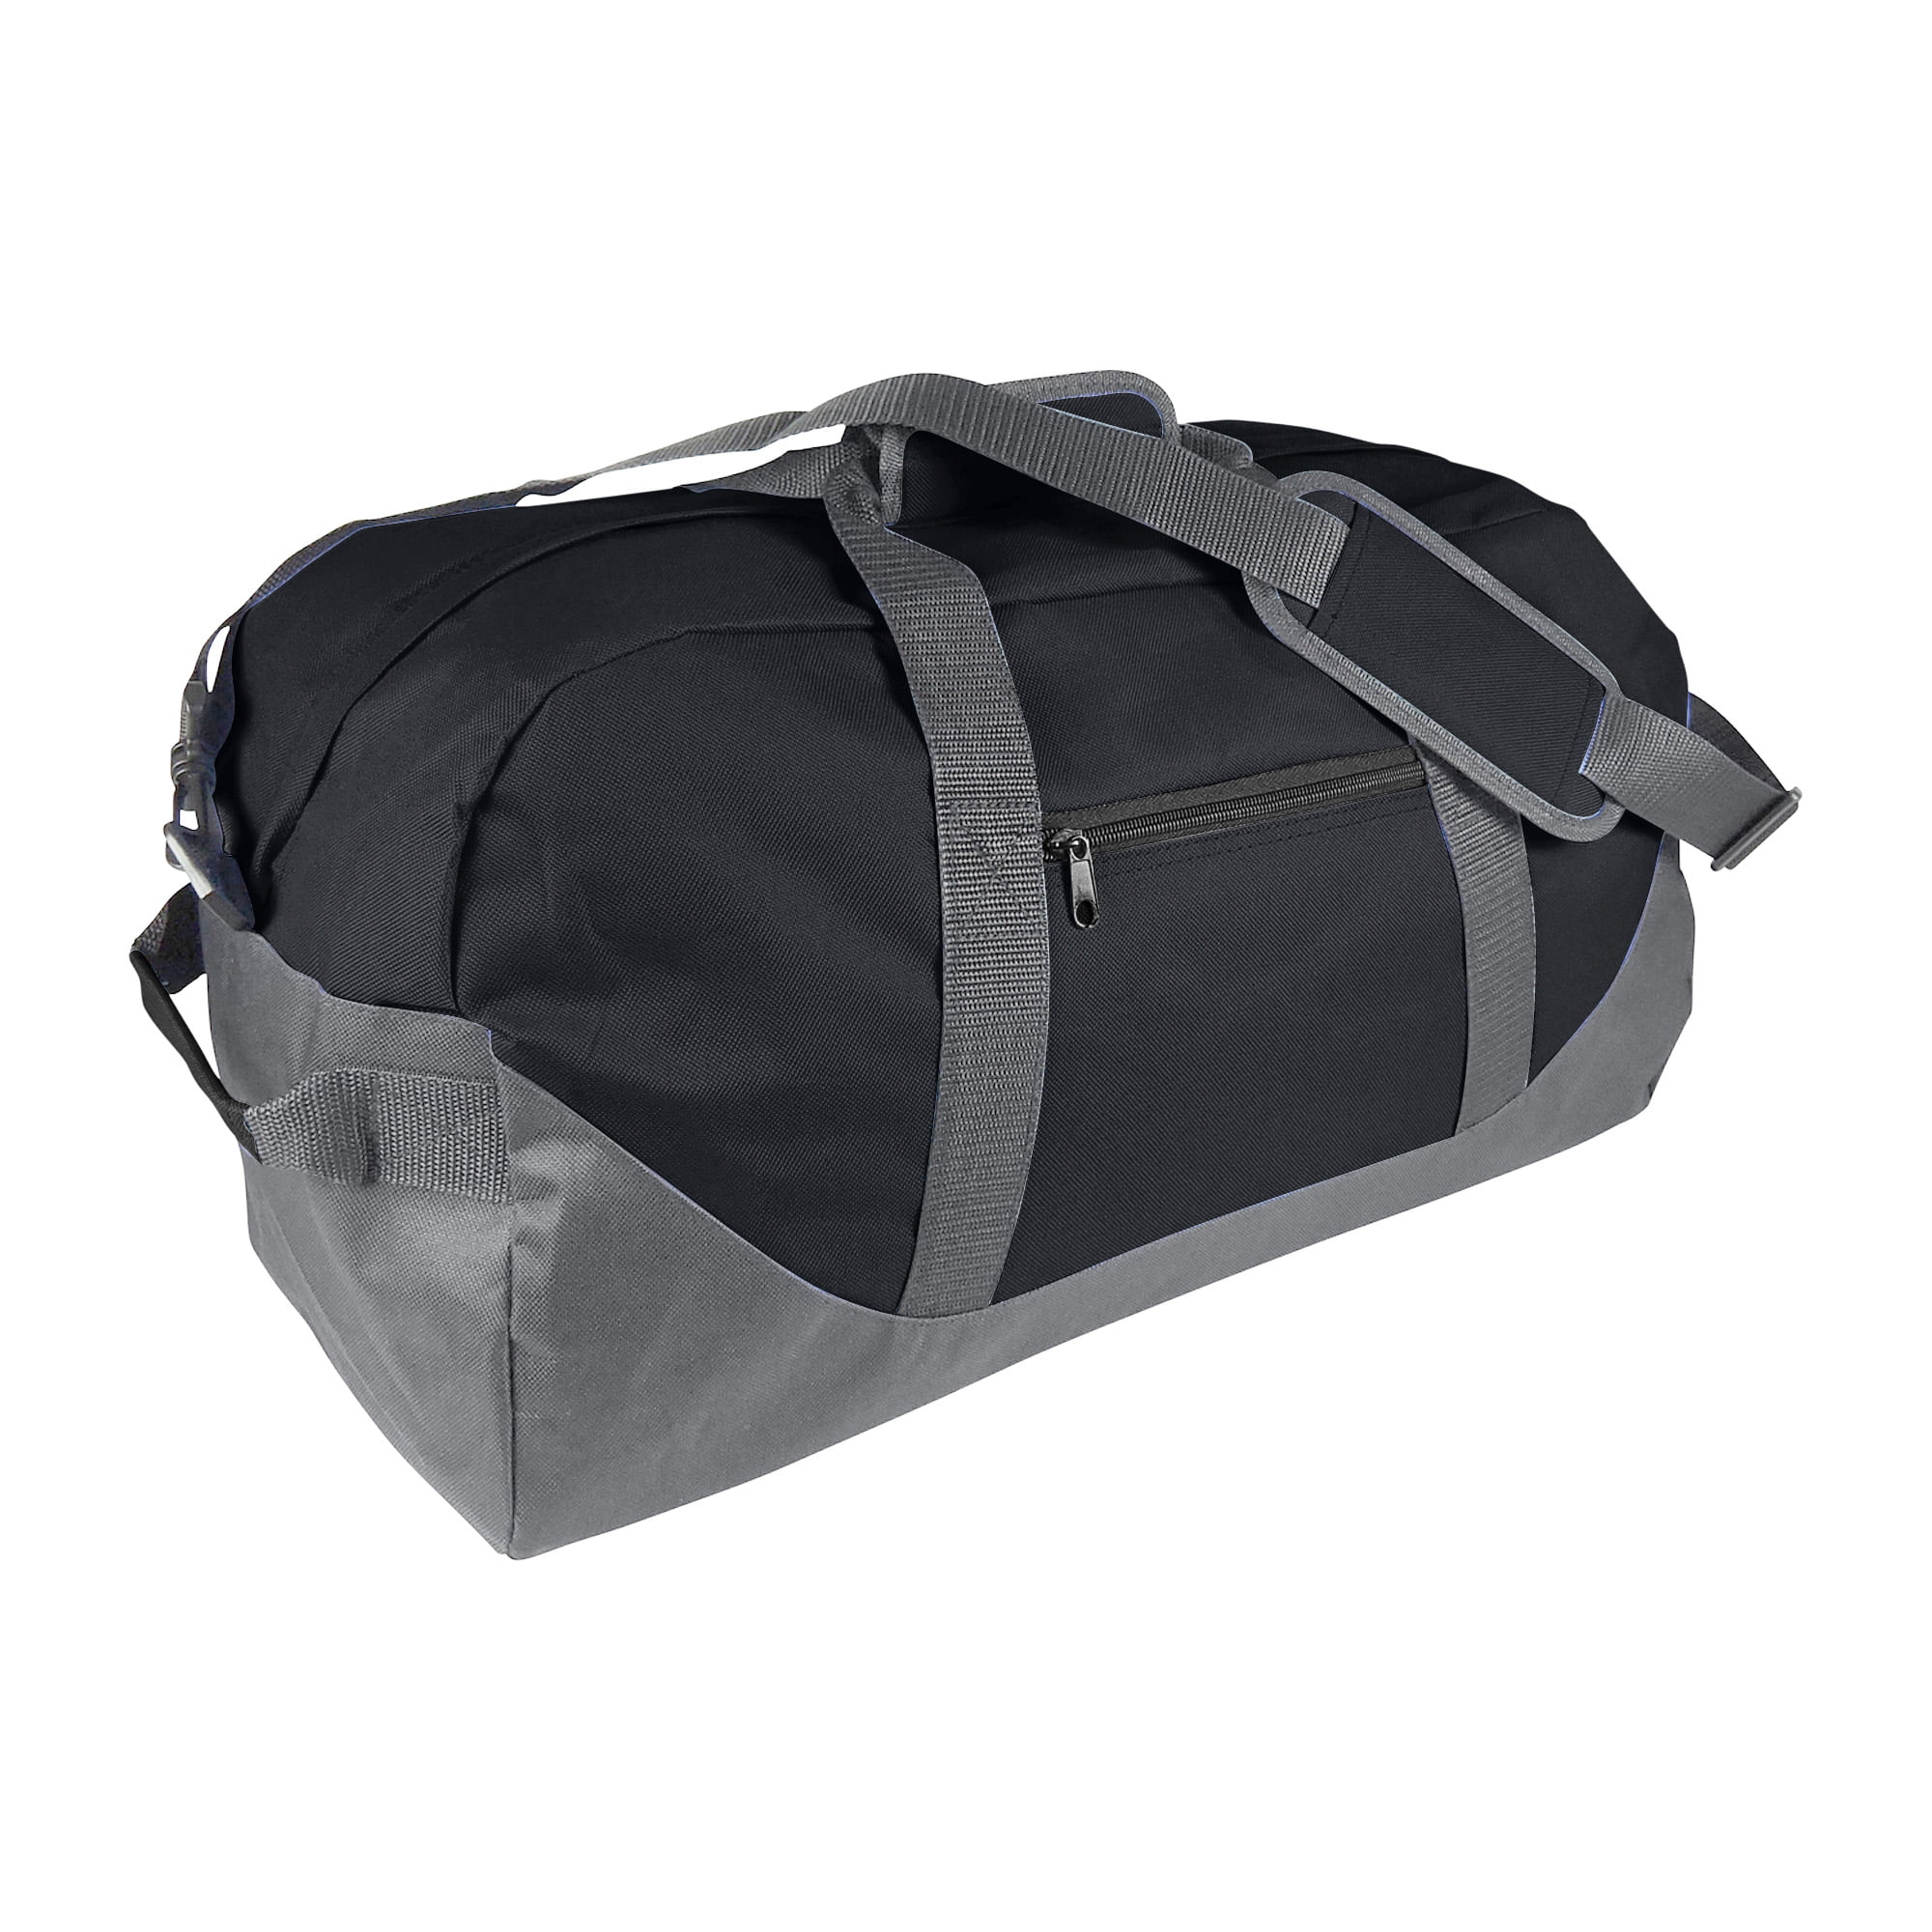 21 Large Duffle Bag with Adjustable Strap in Black and Gray - 0 - 0